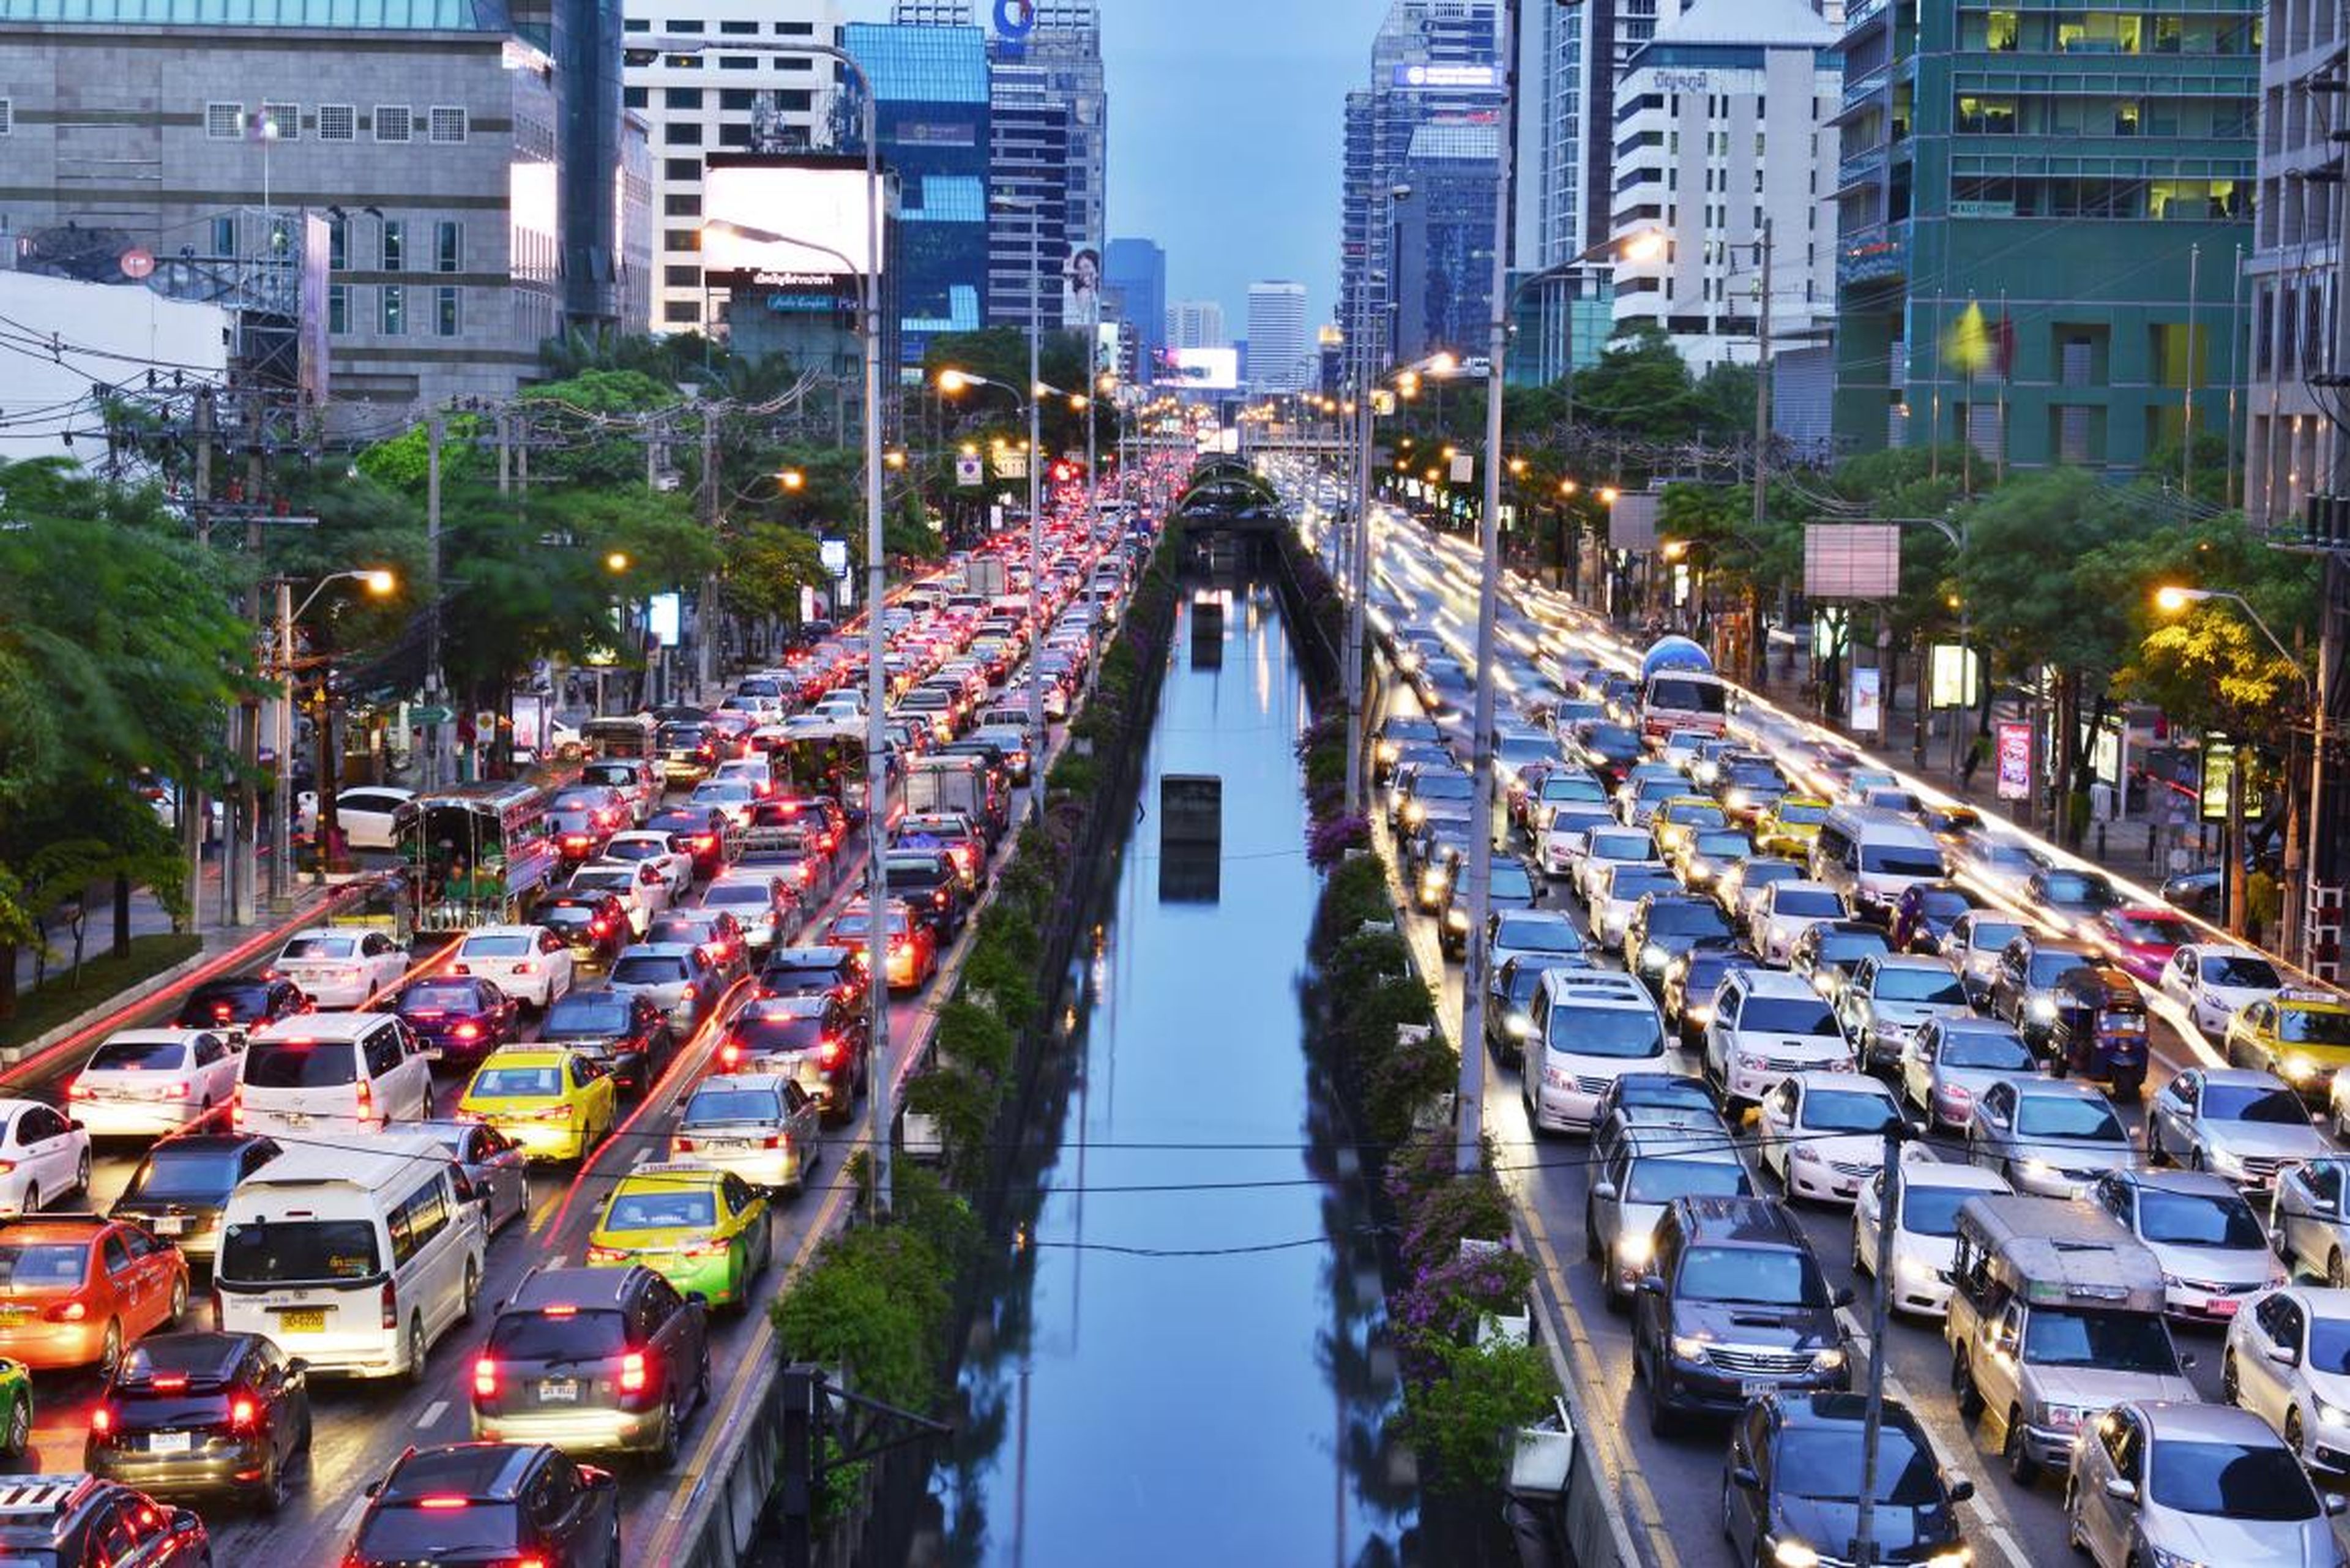 But things are congested there. Ten million vehicles clog Bangkok's roadways.